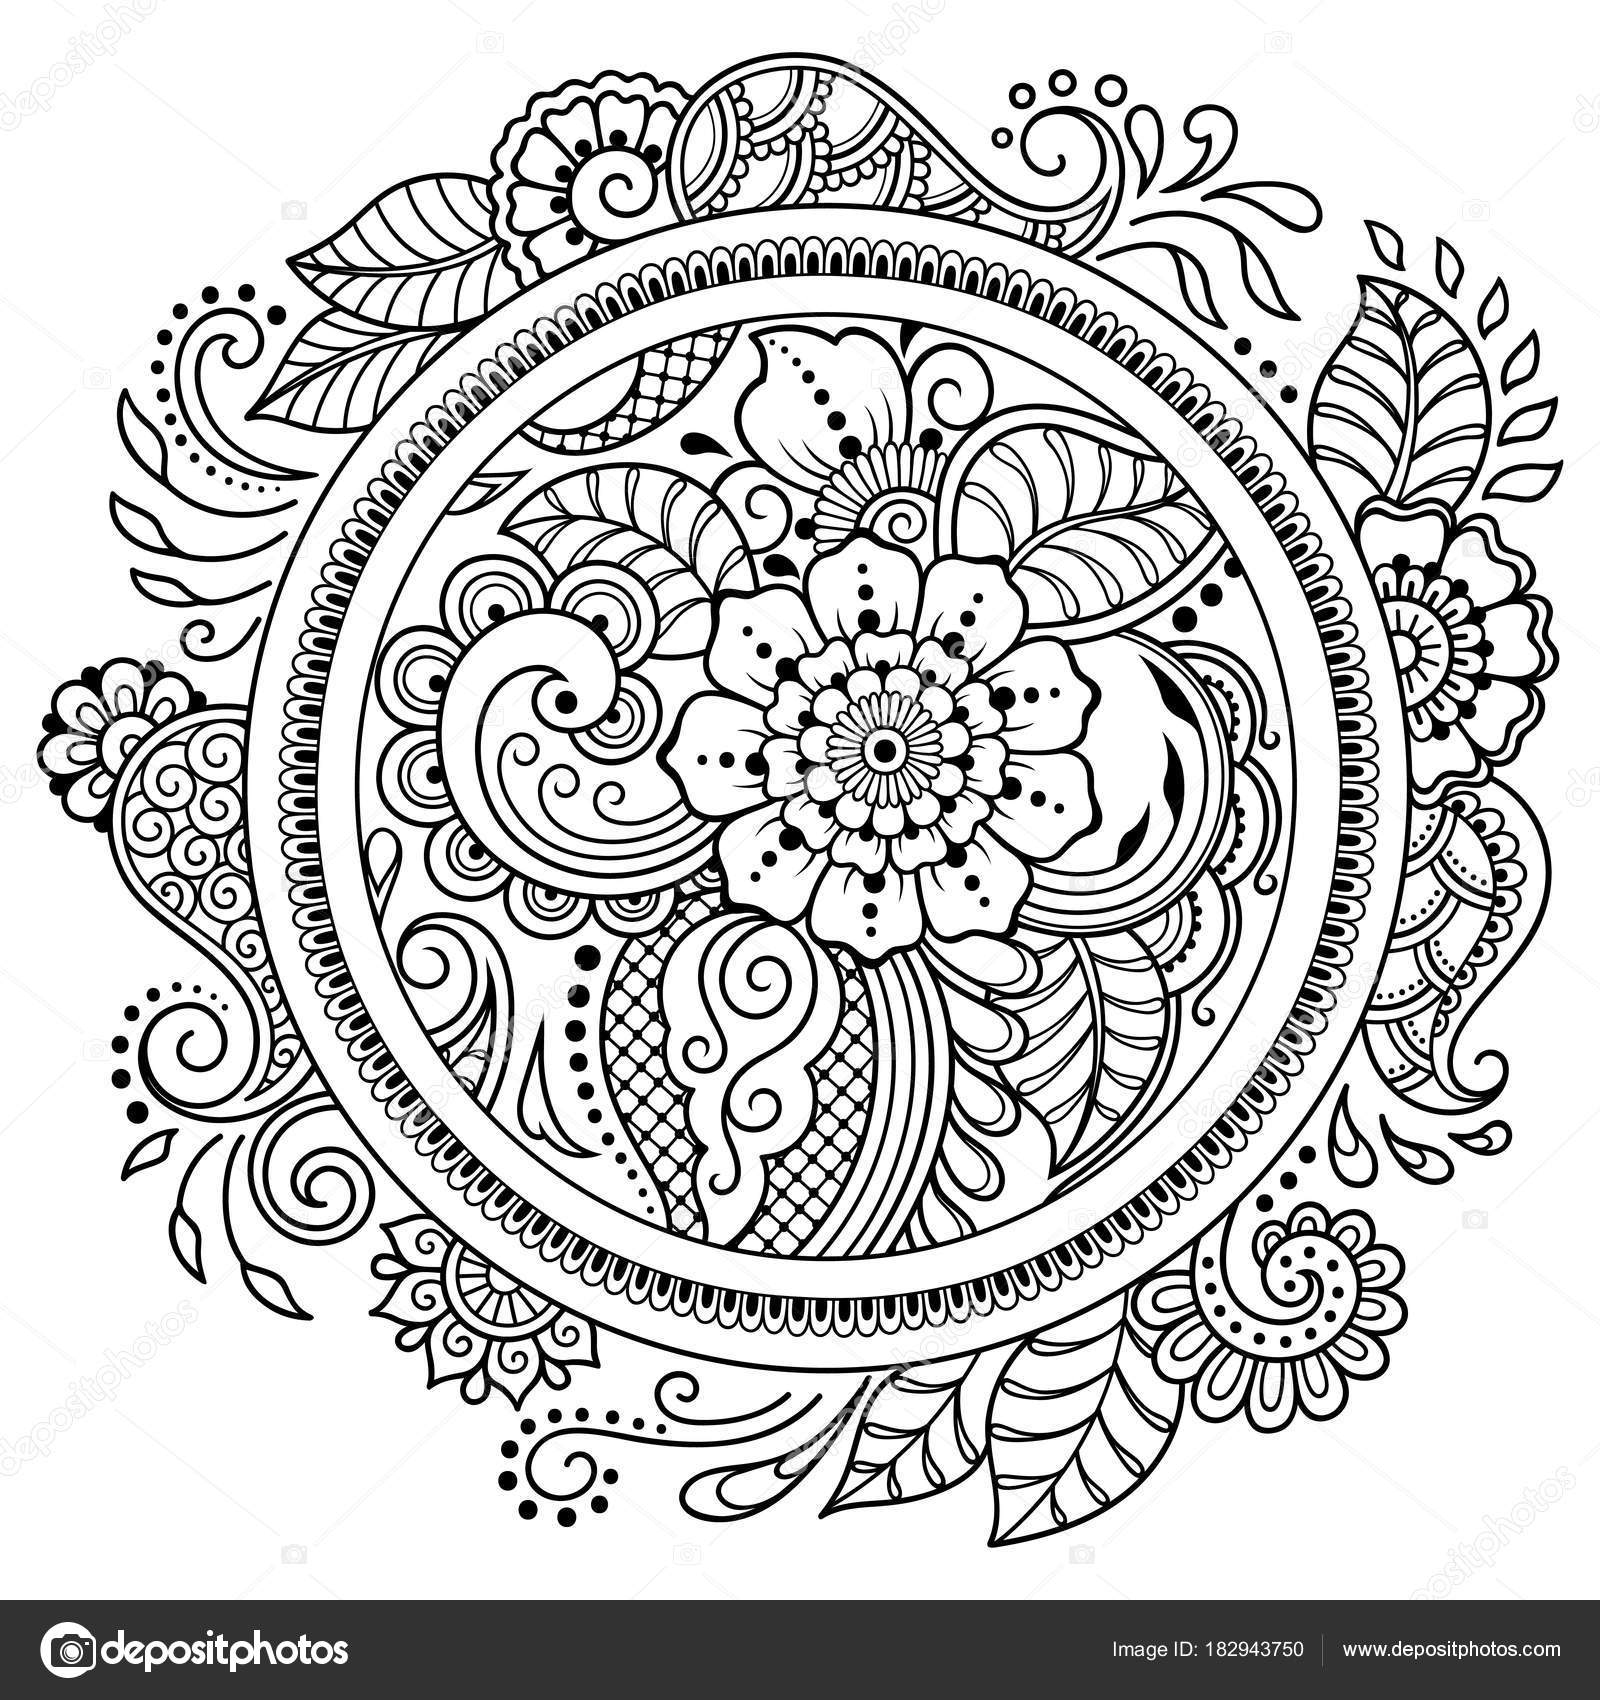 Outline Floral Pattern Coloring Book Page Antistress Coloring